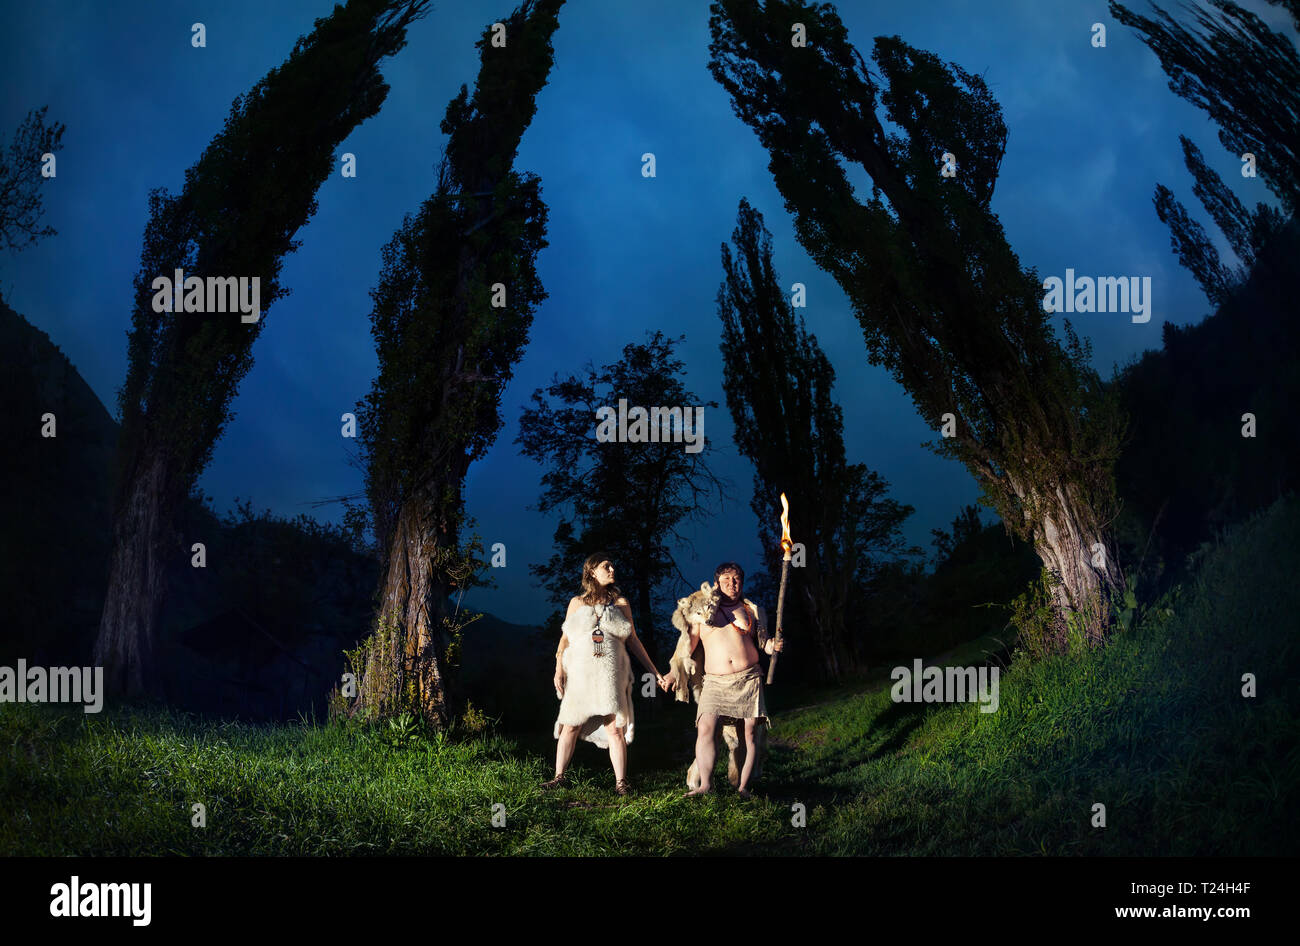 Primitive people dressed in animal with torch light in the dark forest Stock Photo